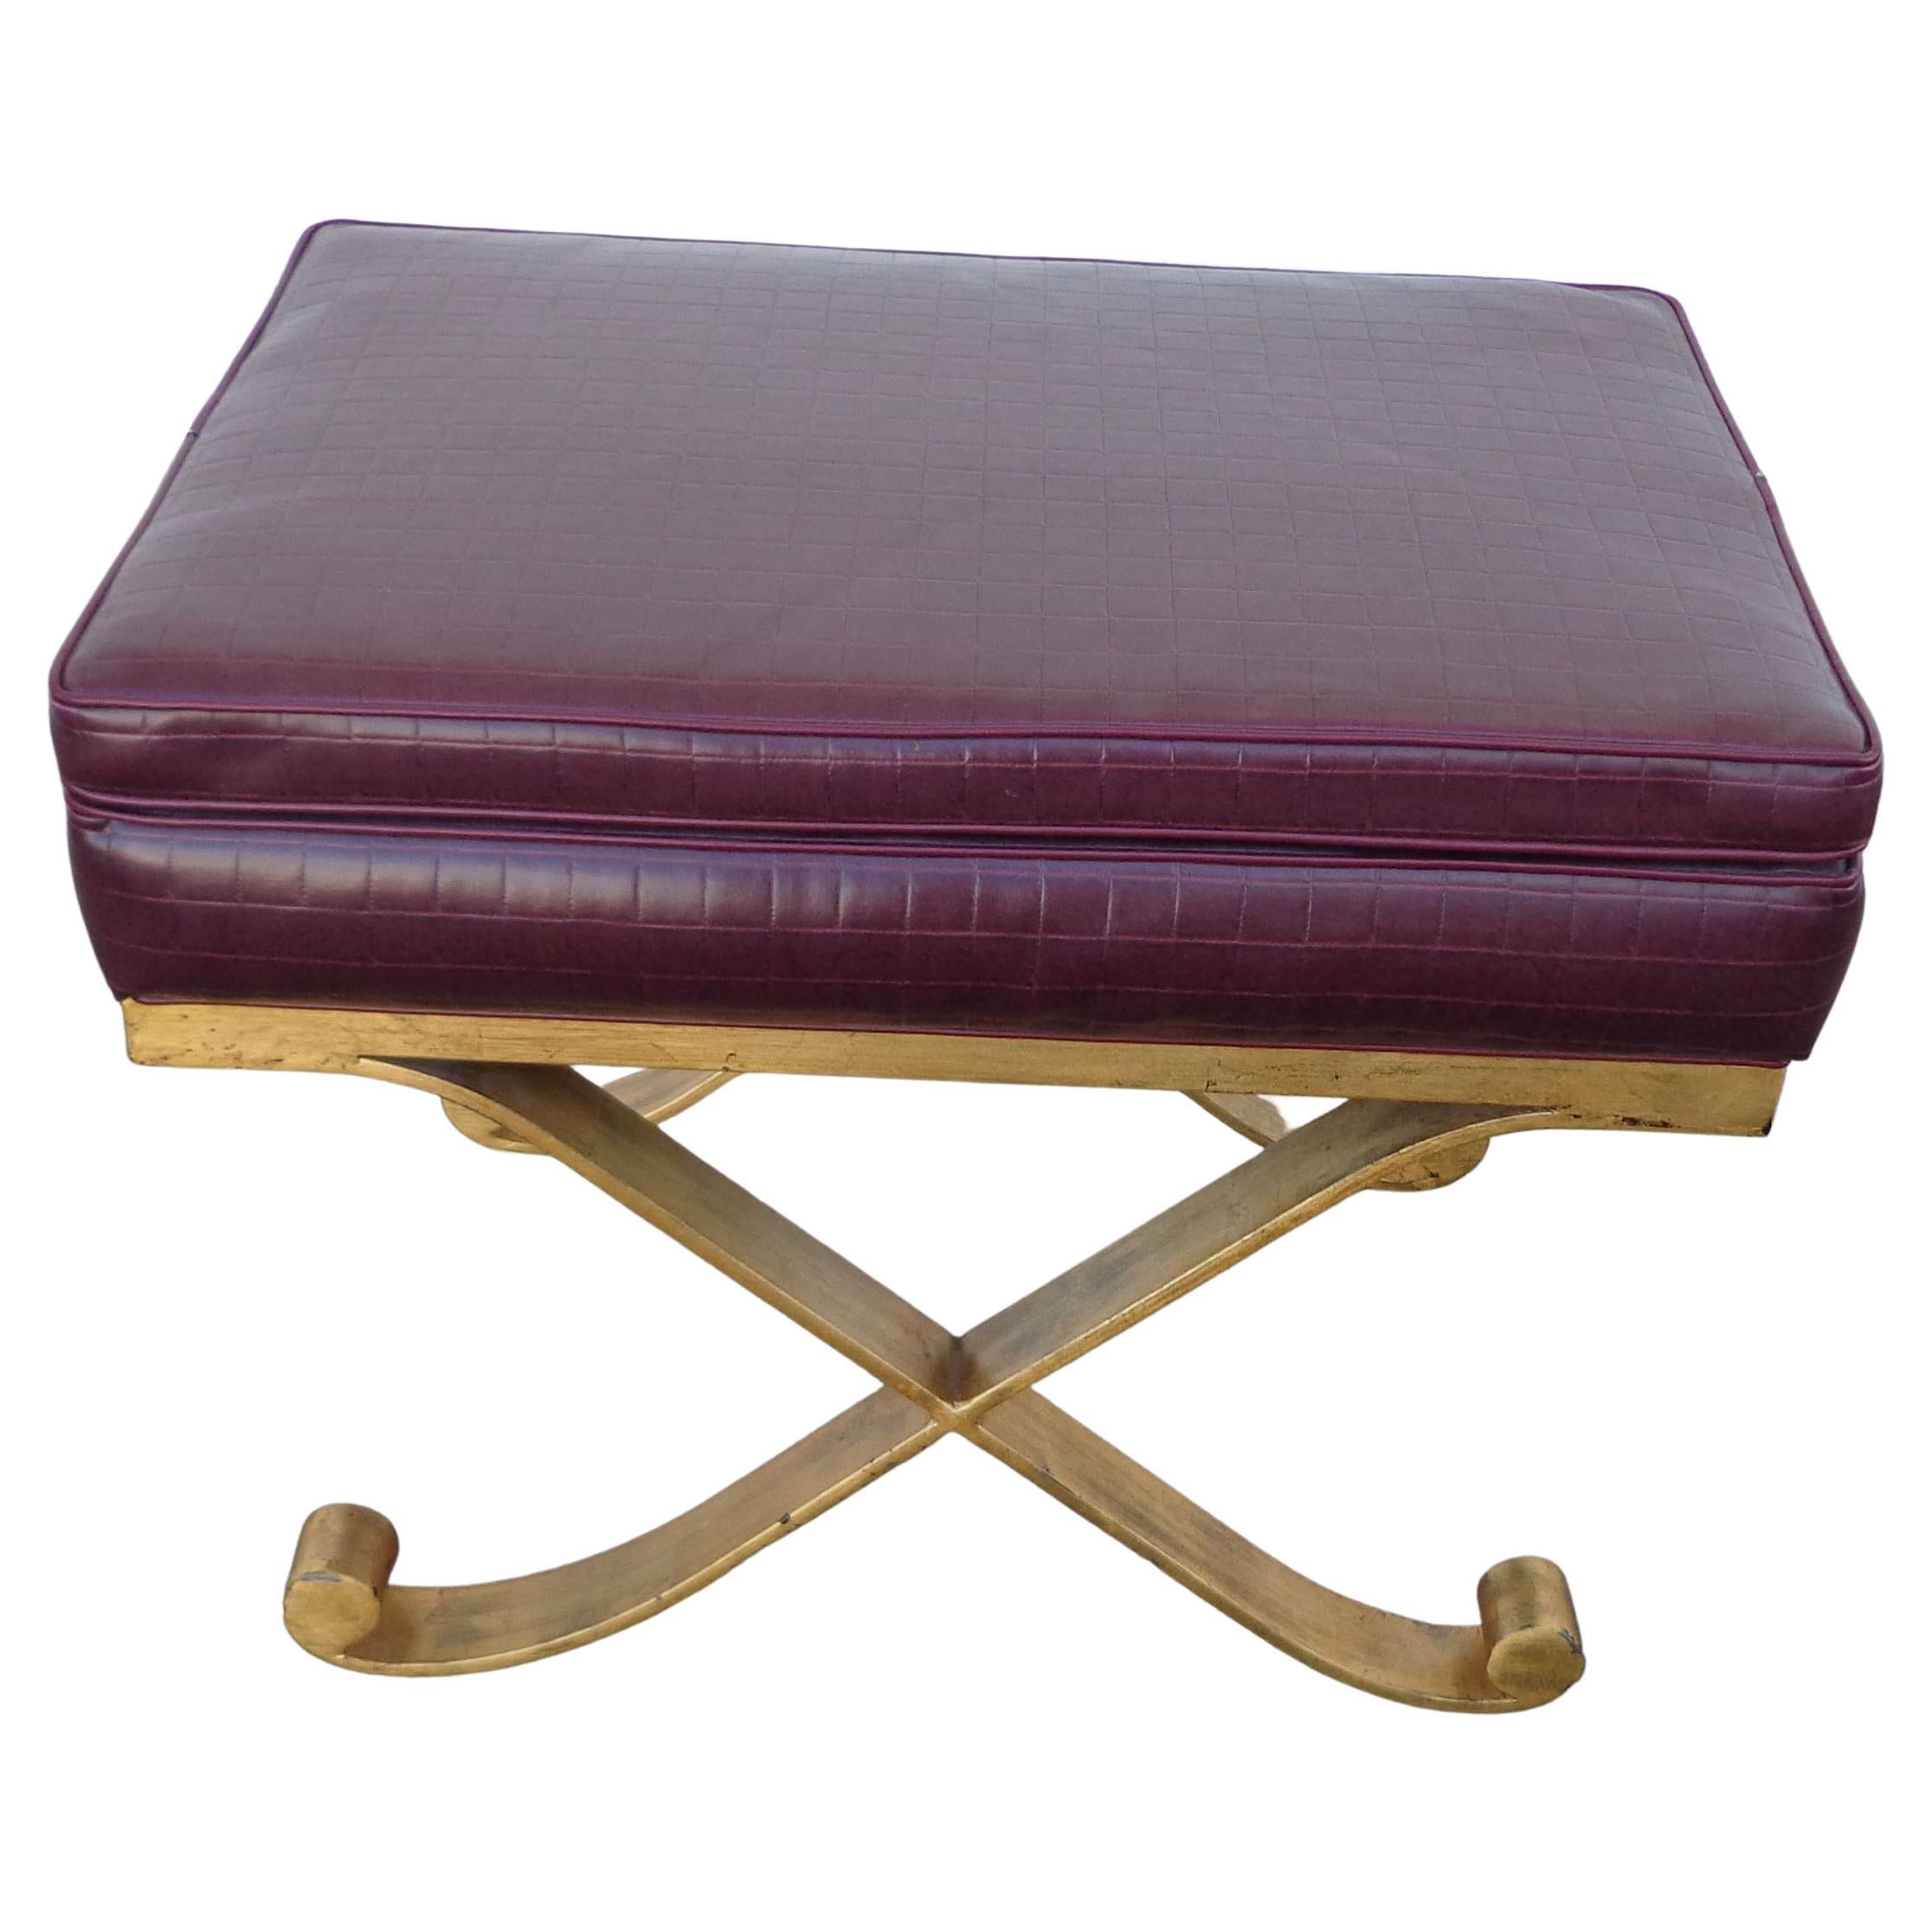 1  Hollywood Regency Faux Croc Leather X Stool 

Gold finish x base with stamped upholstery in burgundy. We have 2 available.

Price is for 1